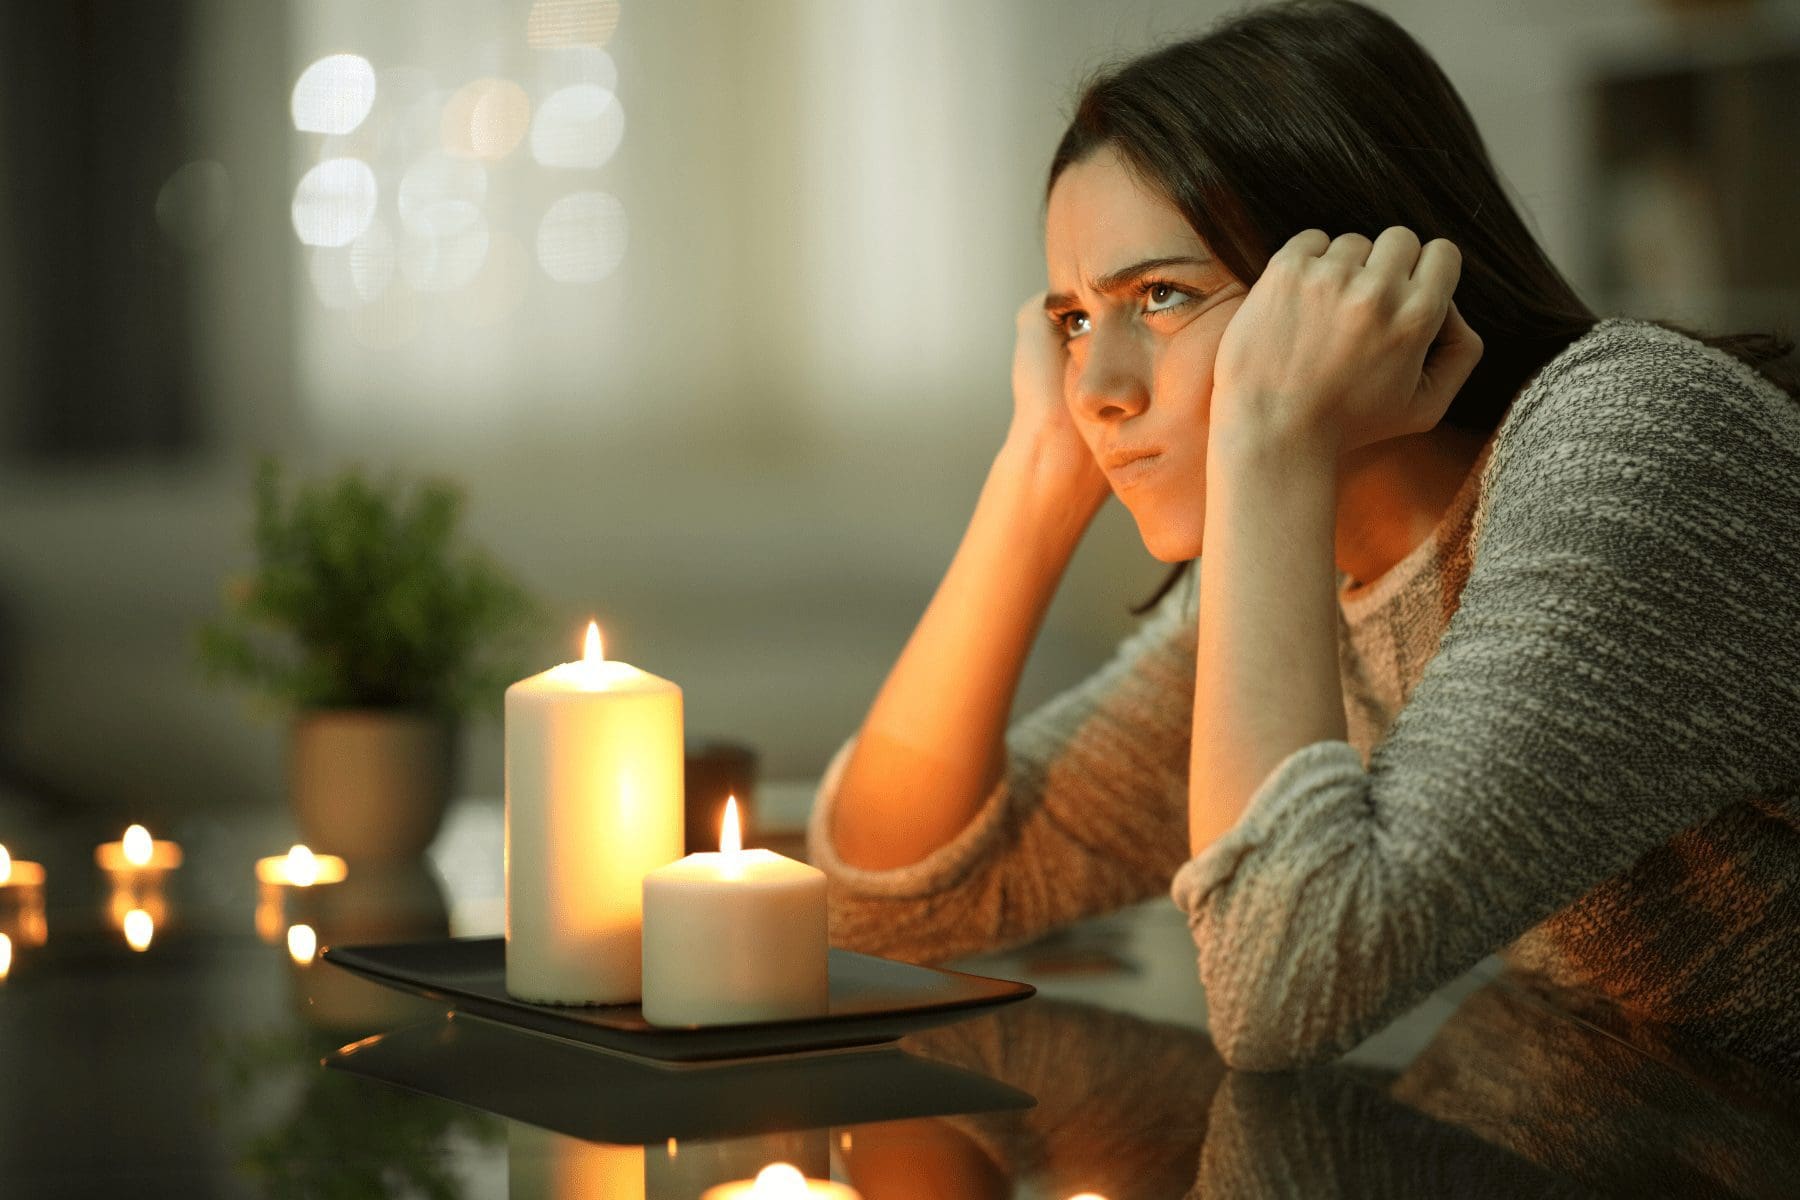 woman sitting in a dark restaurant because of a power outage, with candles lit